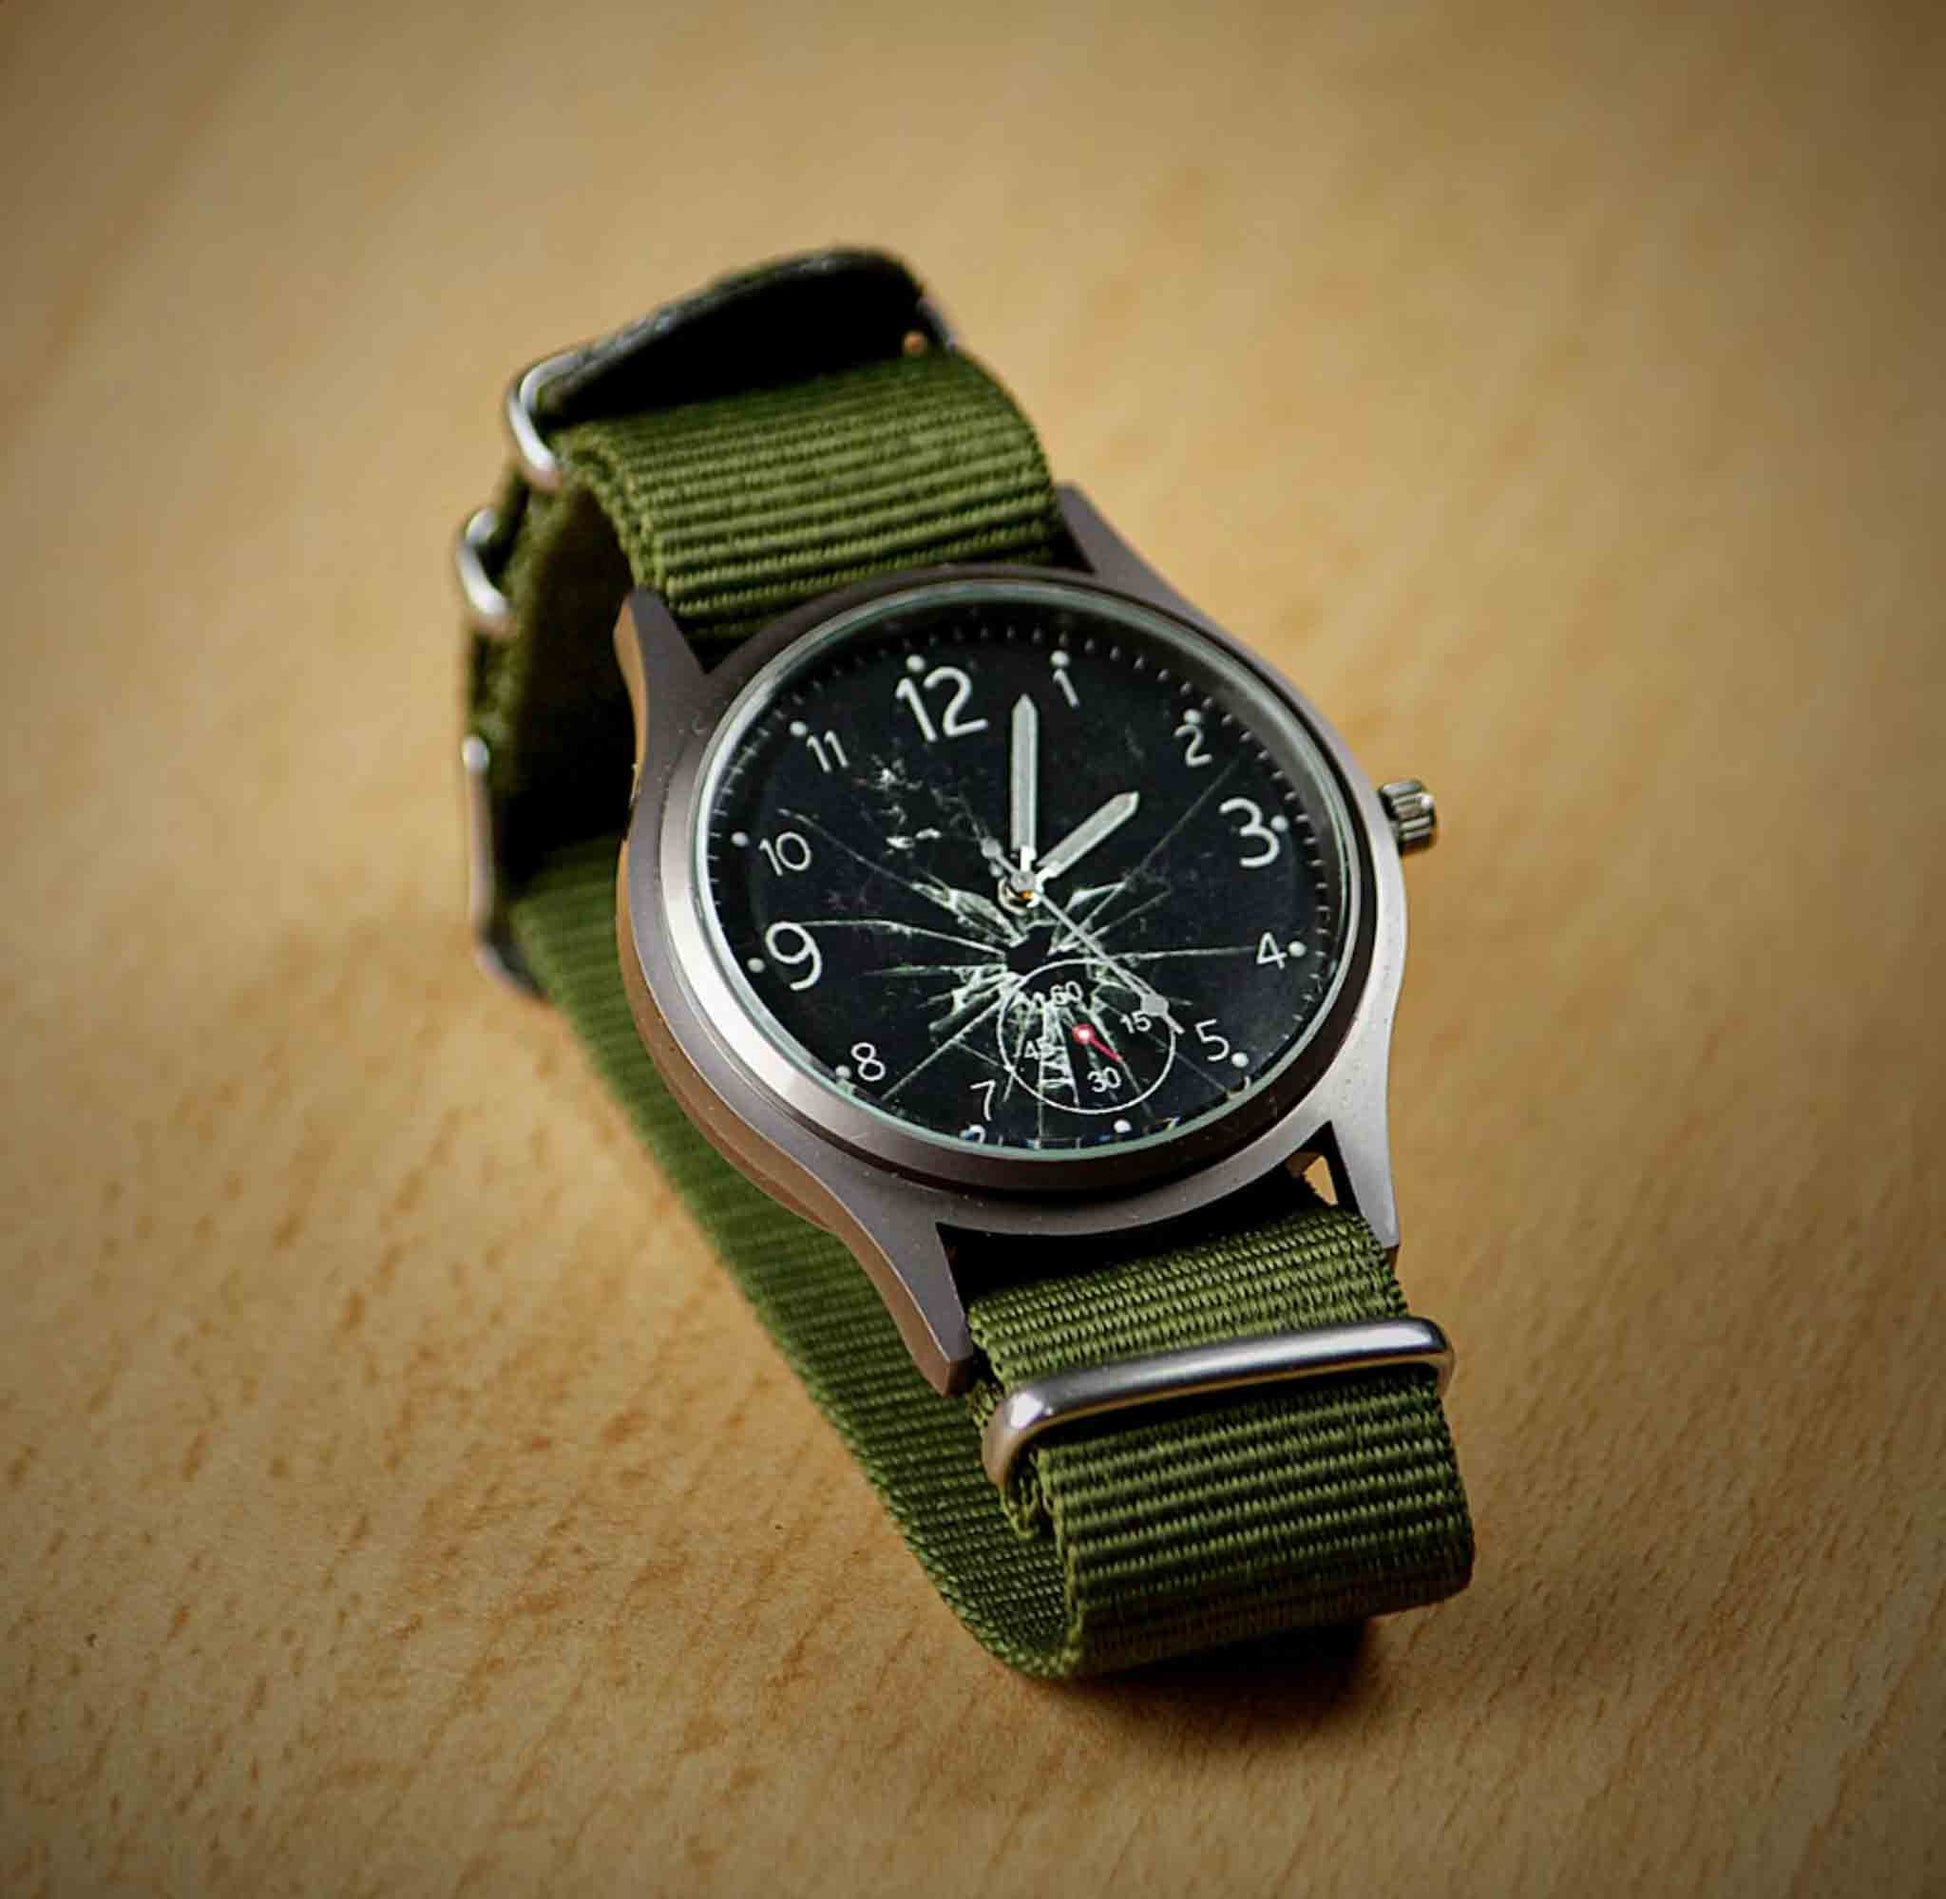 The Last of Us: Joel’s Post-Outbreak Watch - Available at 2Fast2See.co